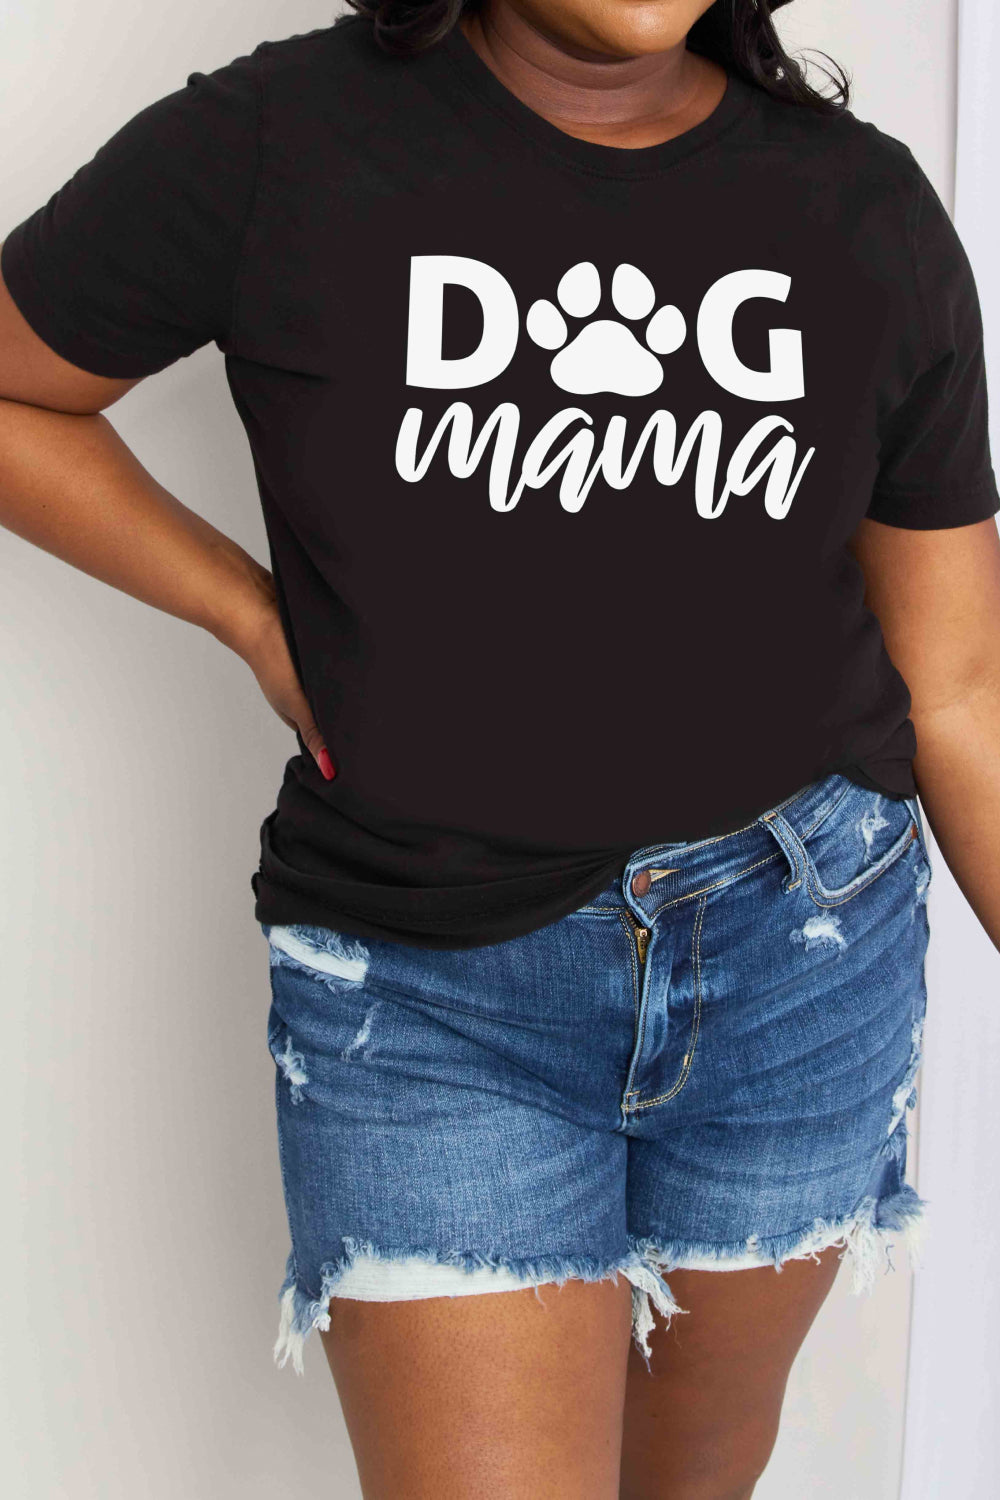 DOG MAMA 100% Cotton Graphic Short-sleeve Tee Shirt (Plus Size Available)